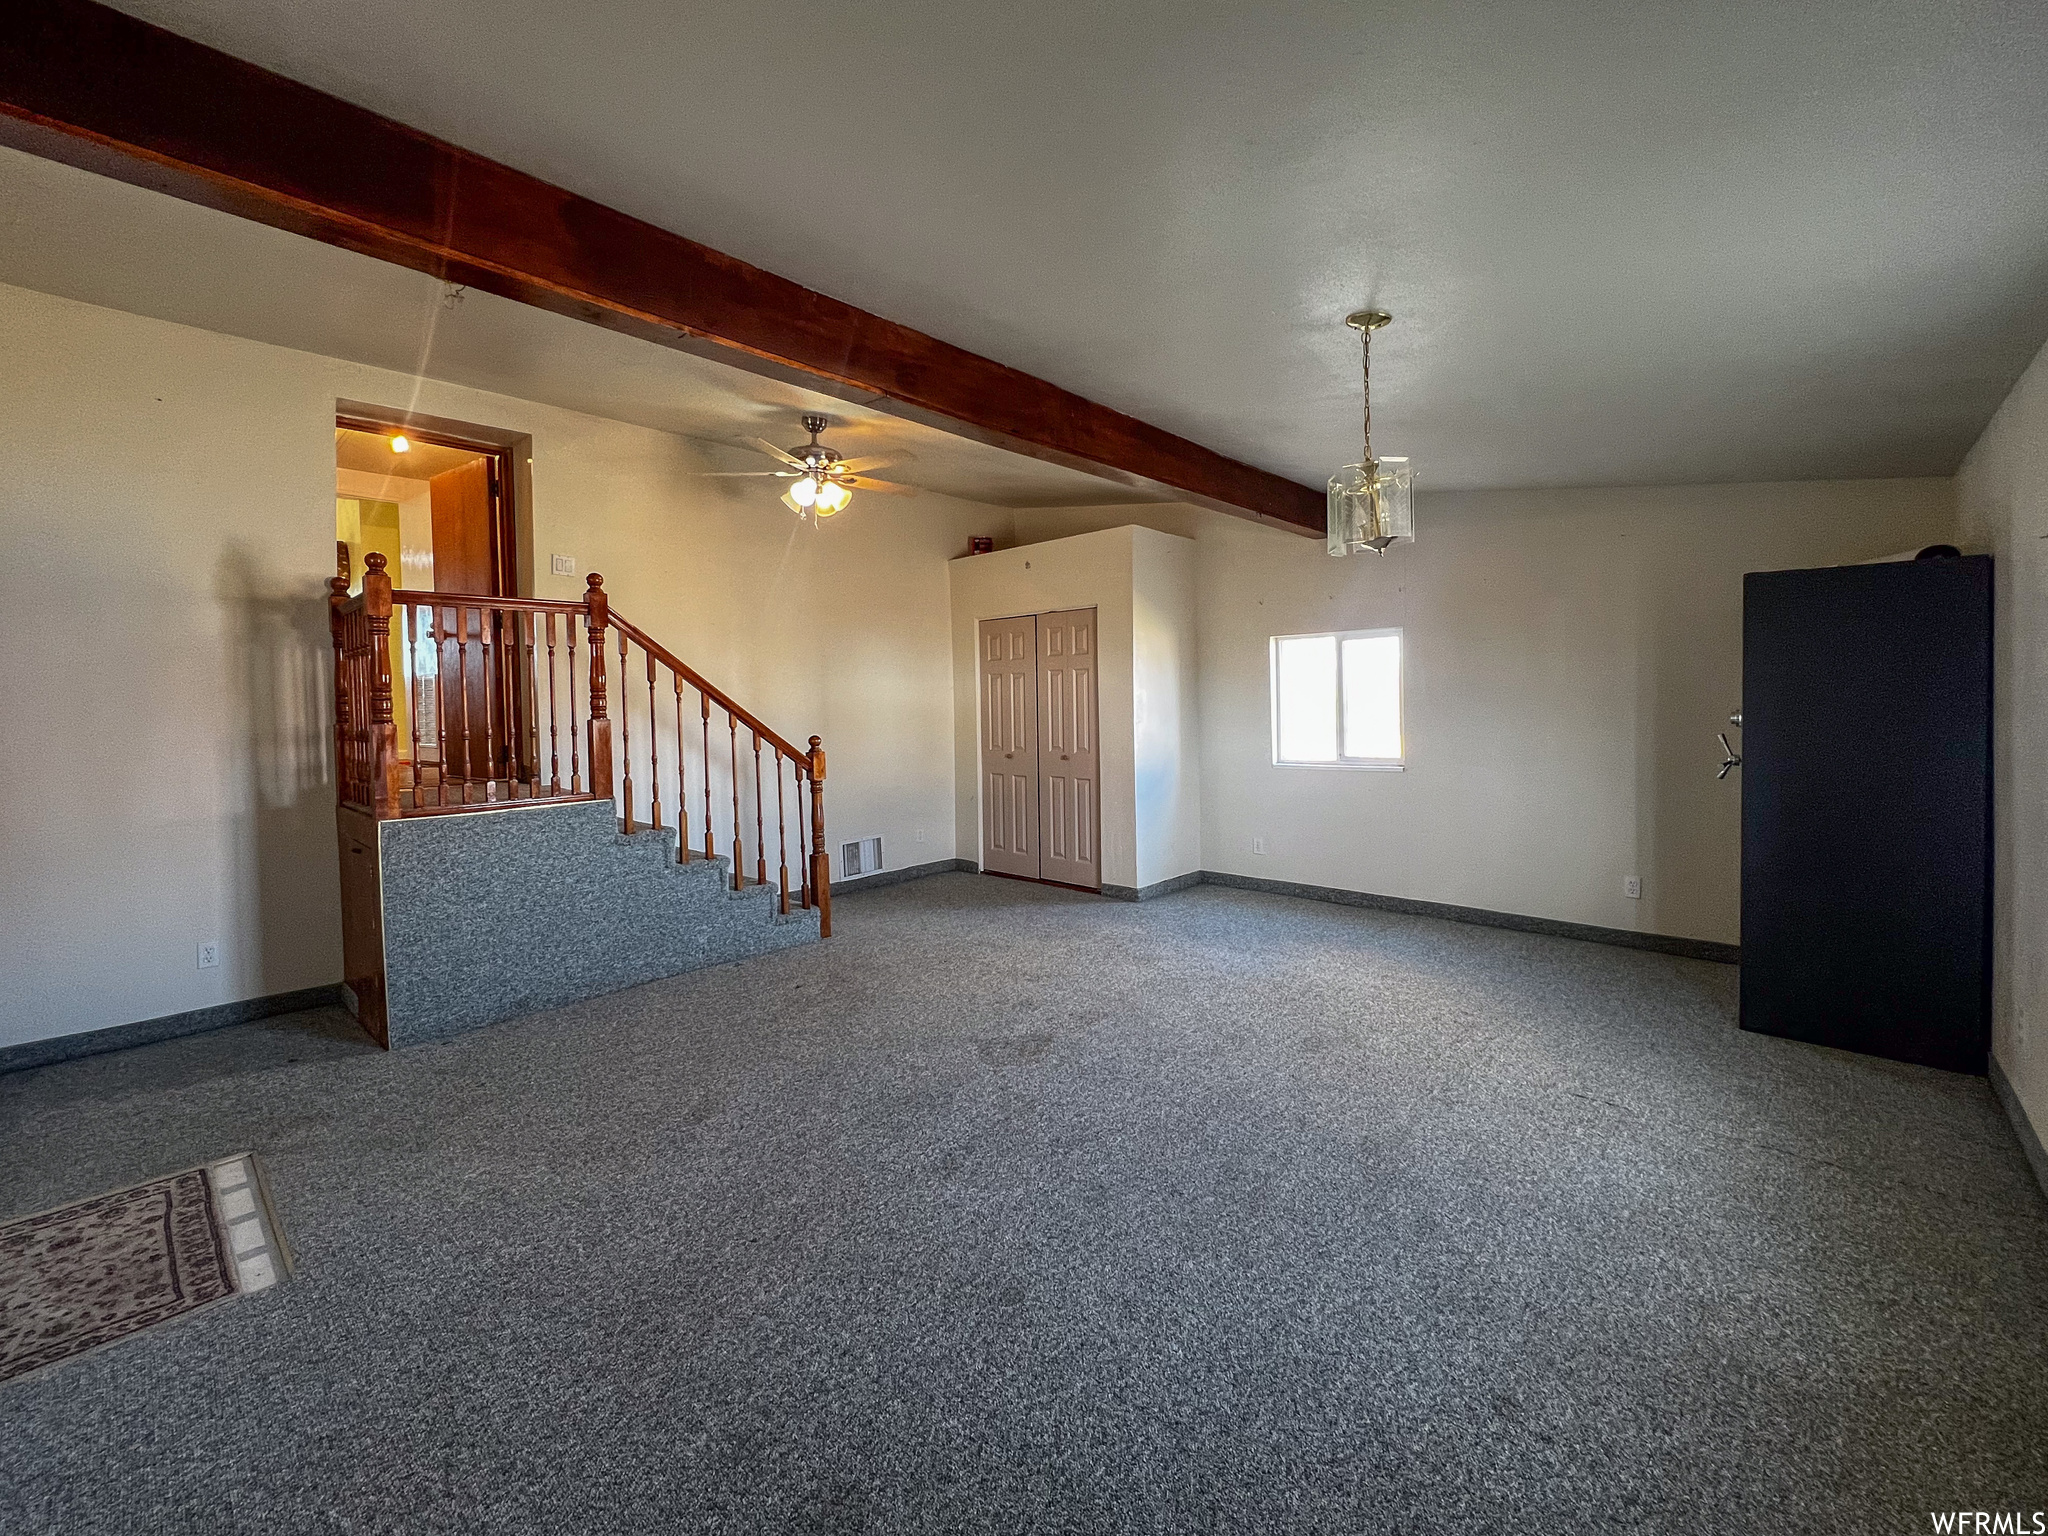 Carpeted spare room with ceiling fan and beam ceiling